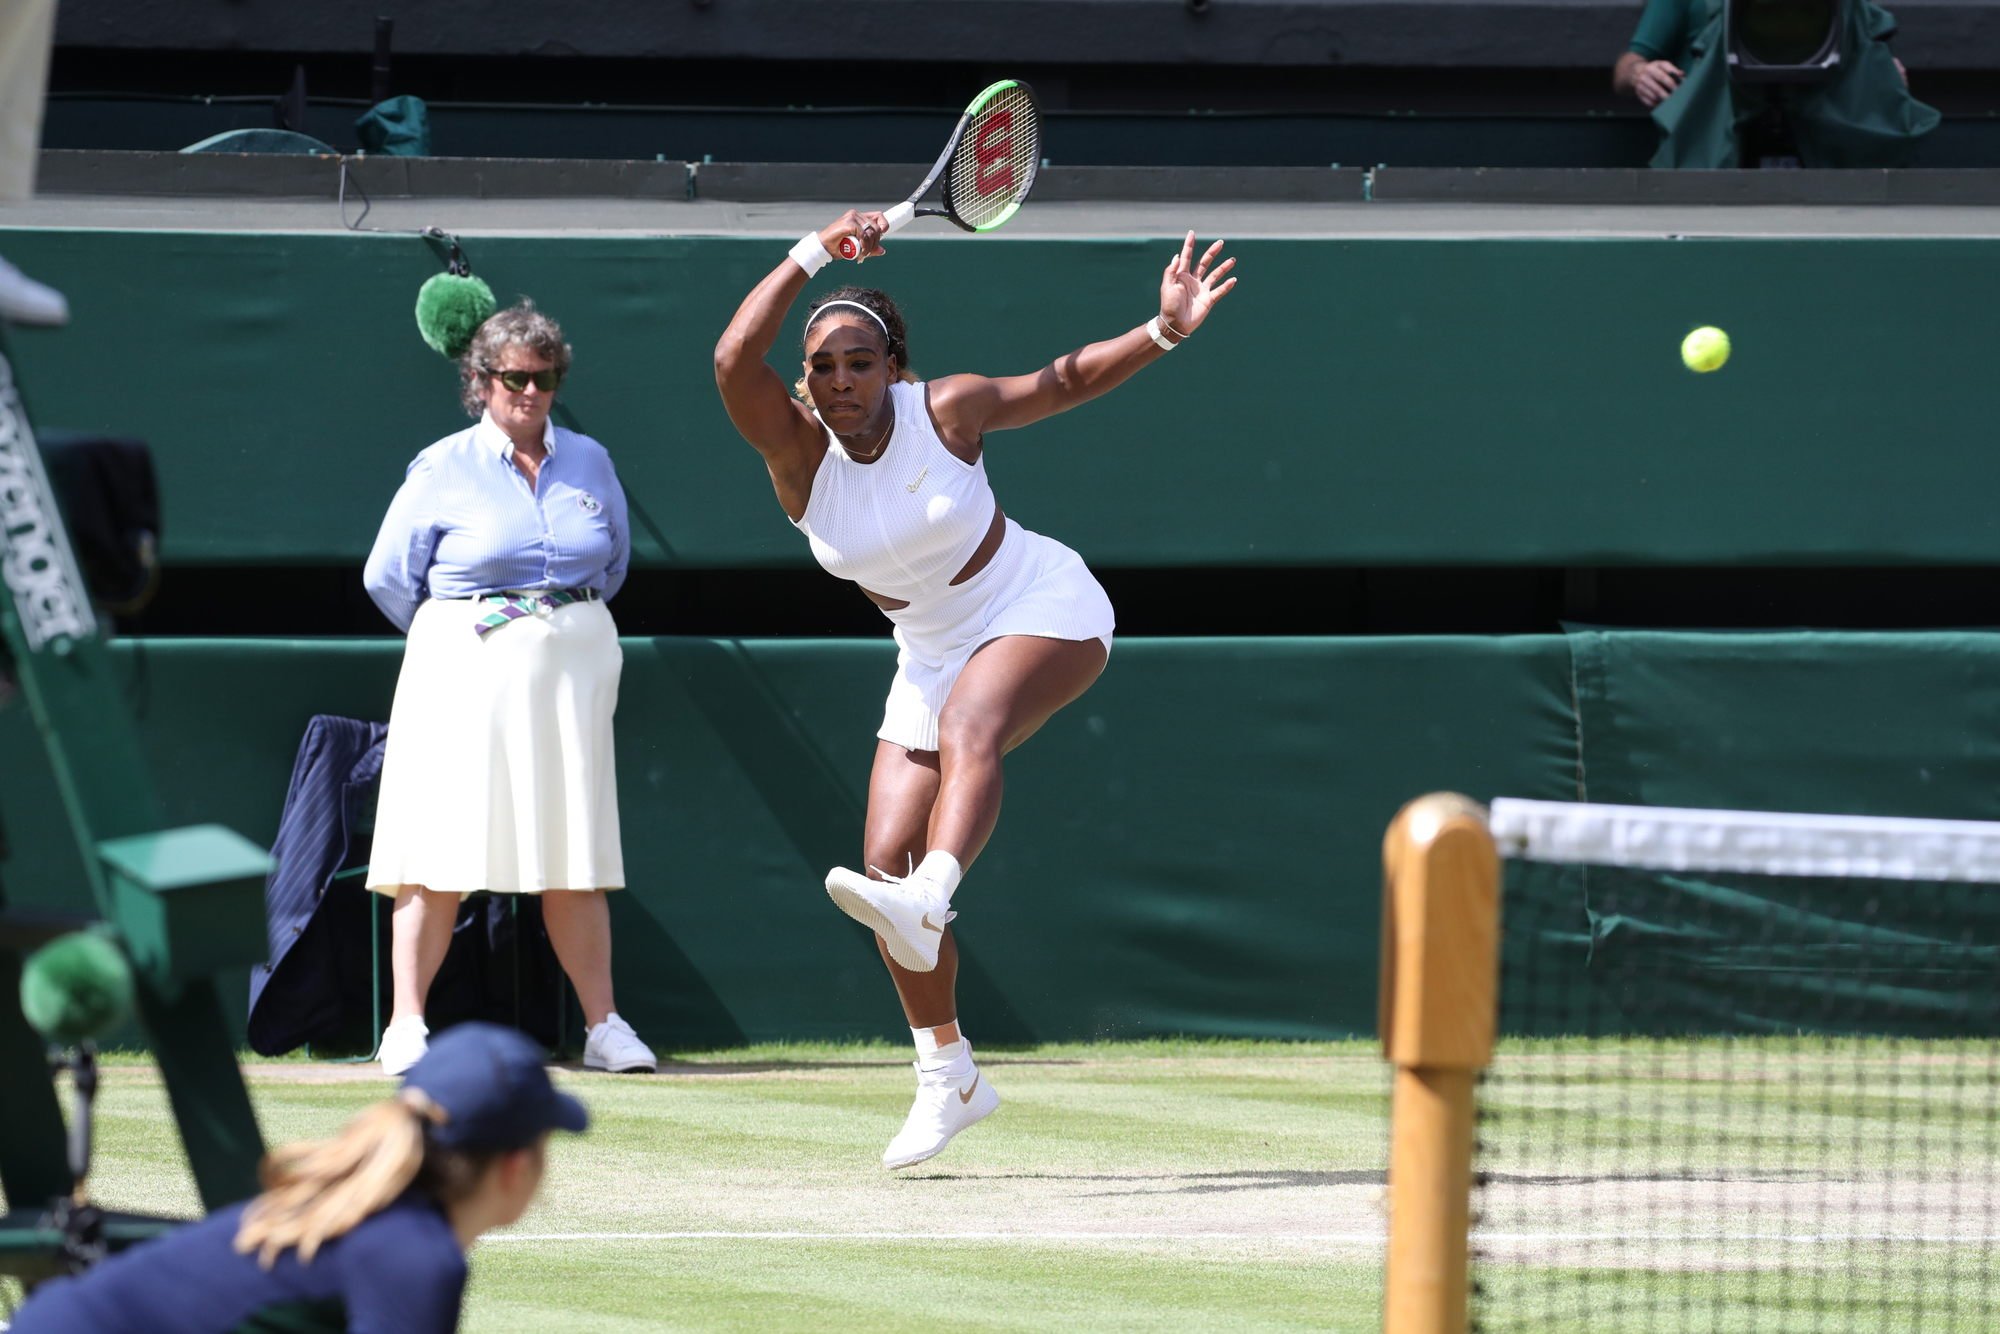 Williams to play Halep in Wimbledon final